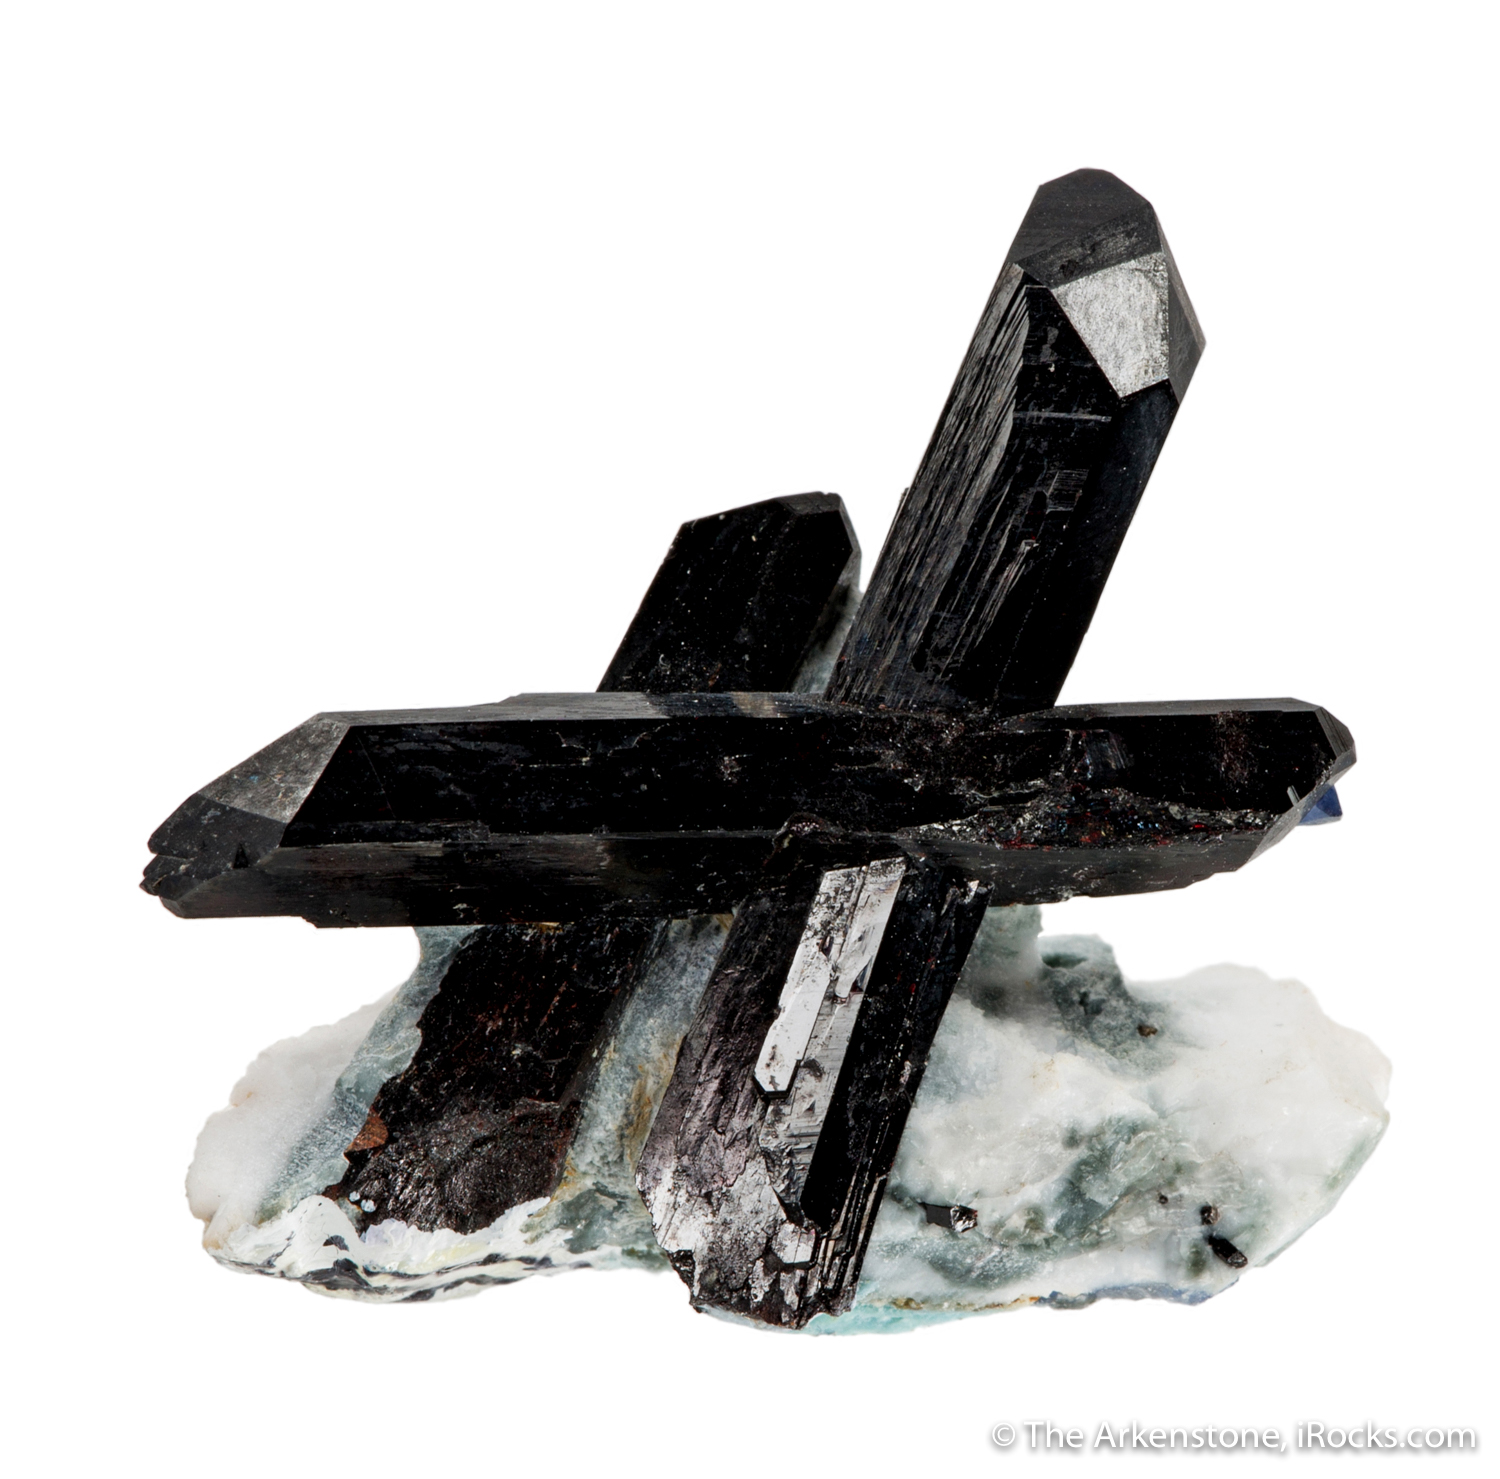 16 Amazing Black Gems, Minerals, Crystals, and Rocks (Photos)